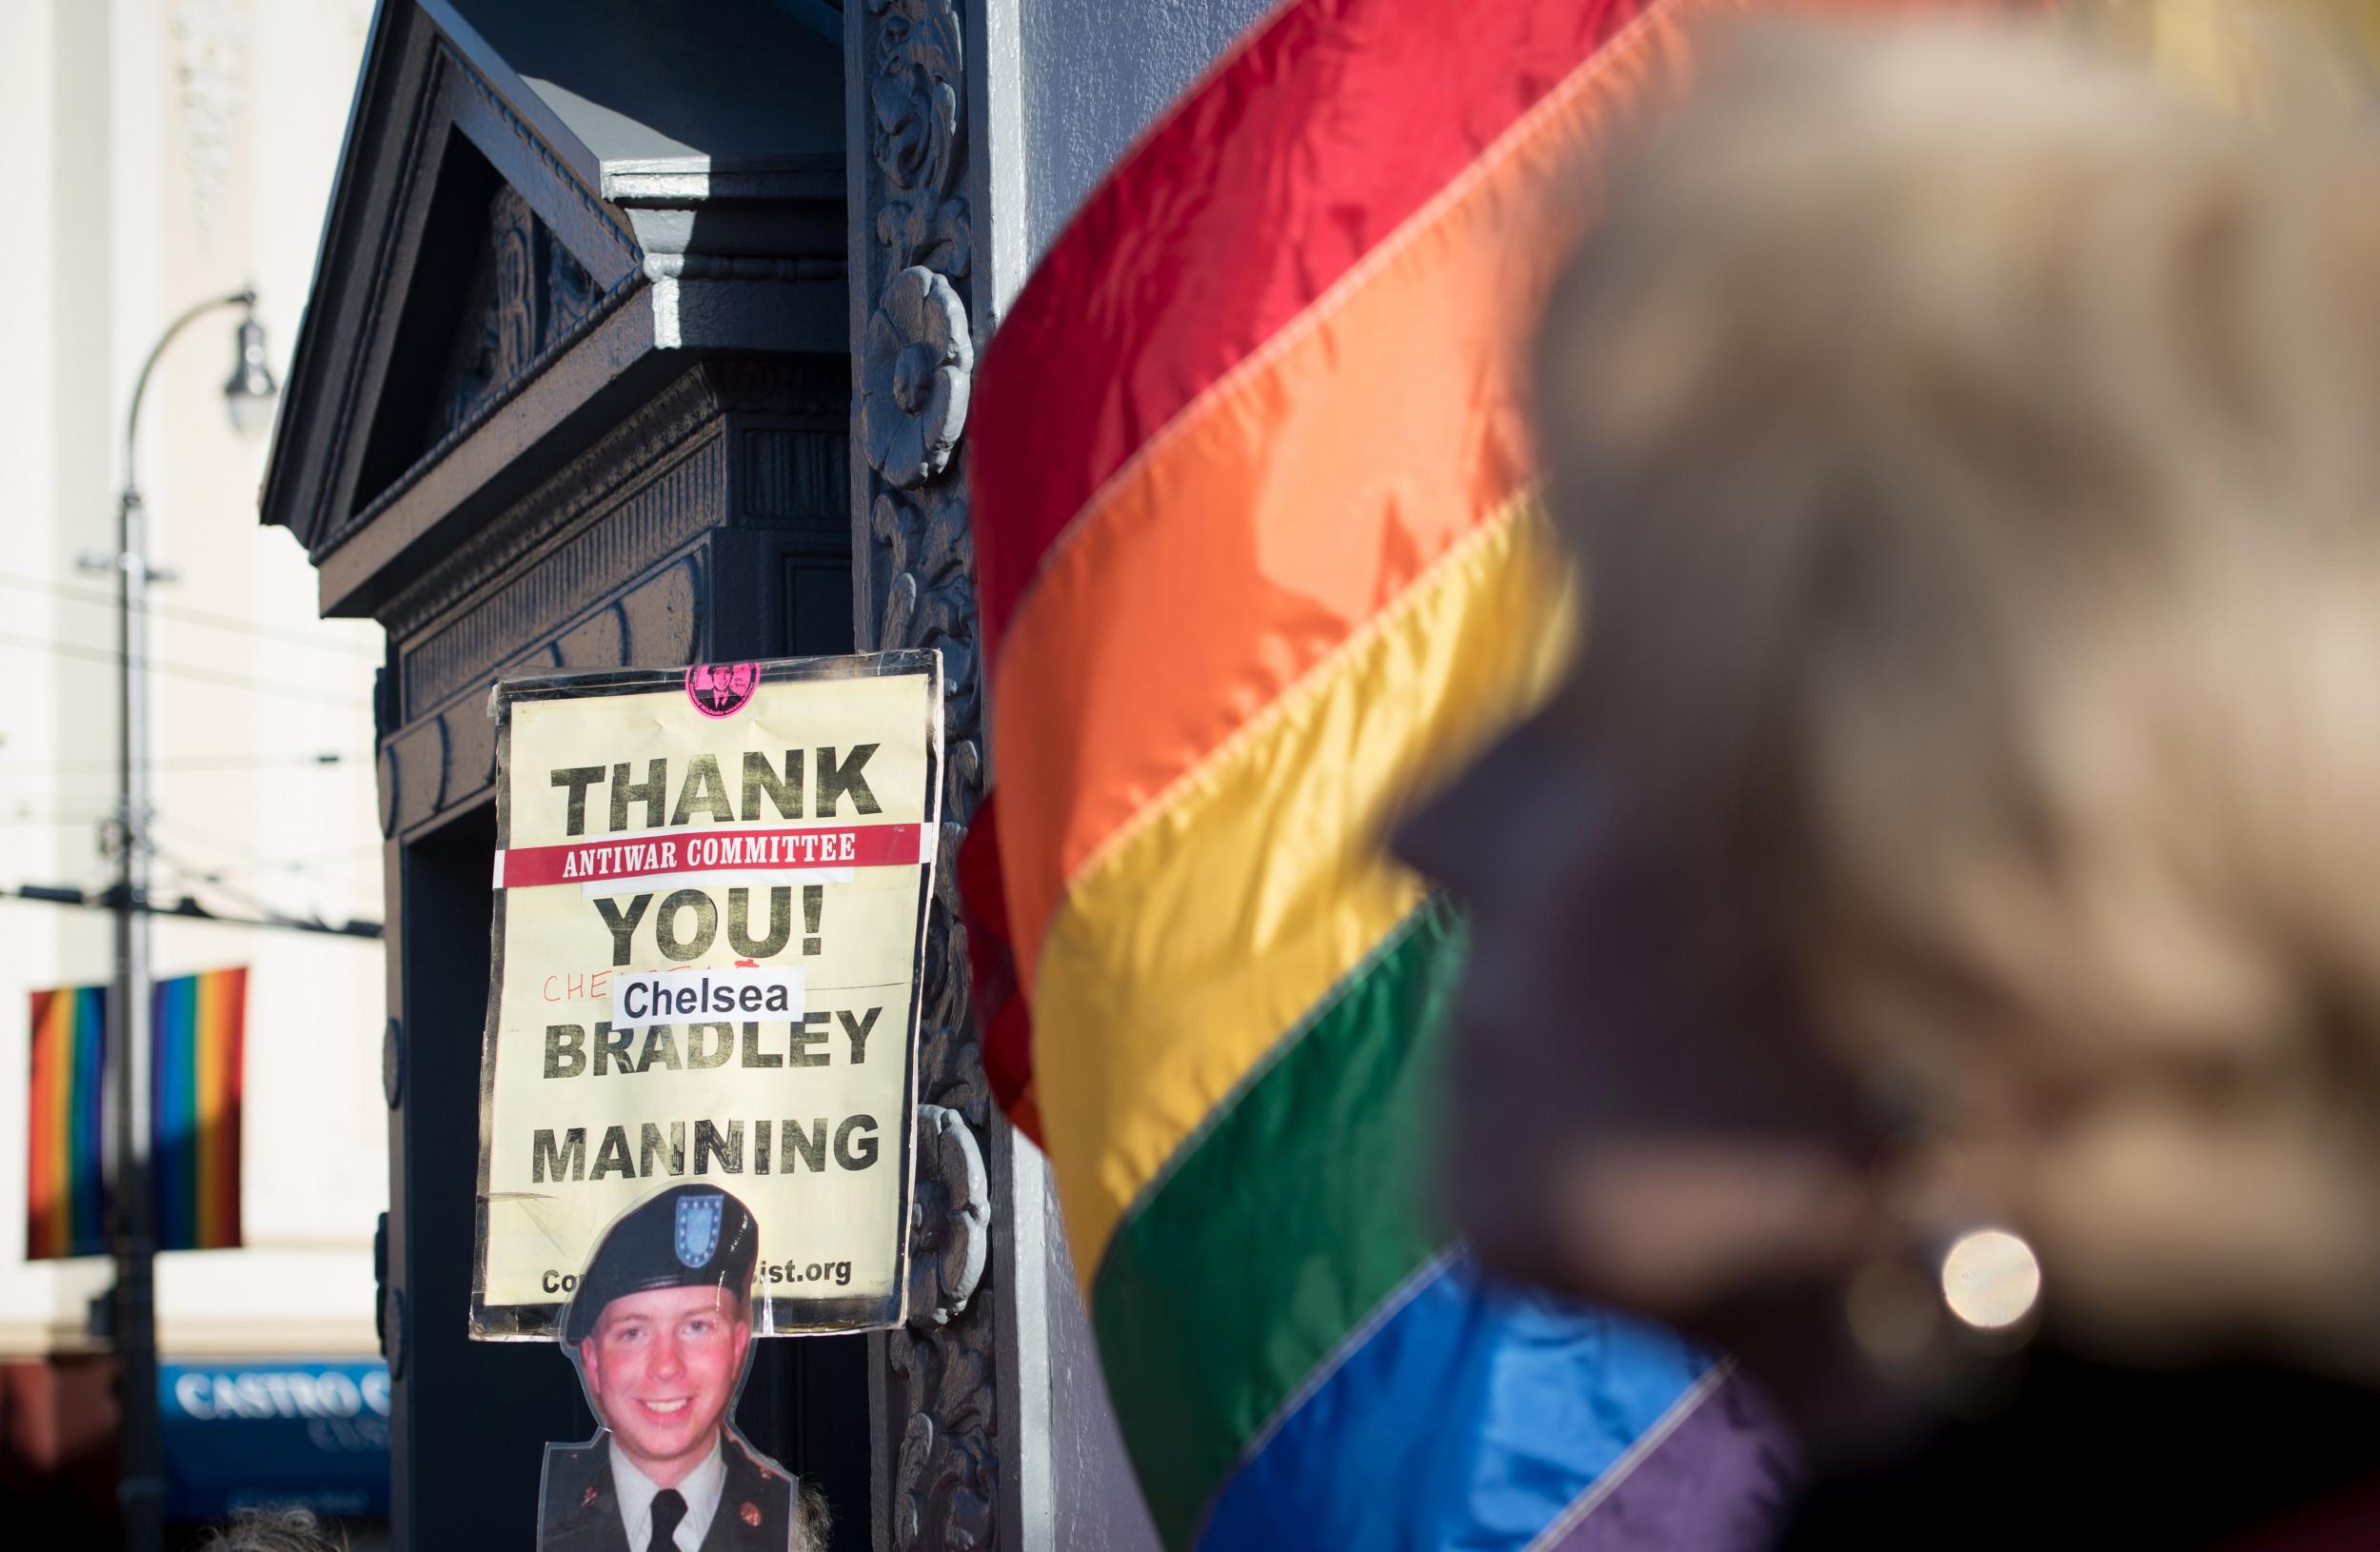 Chelsea Manning began her gender transition therapies while serving in the US armed forces